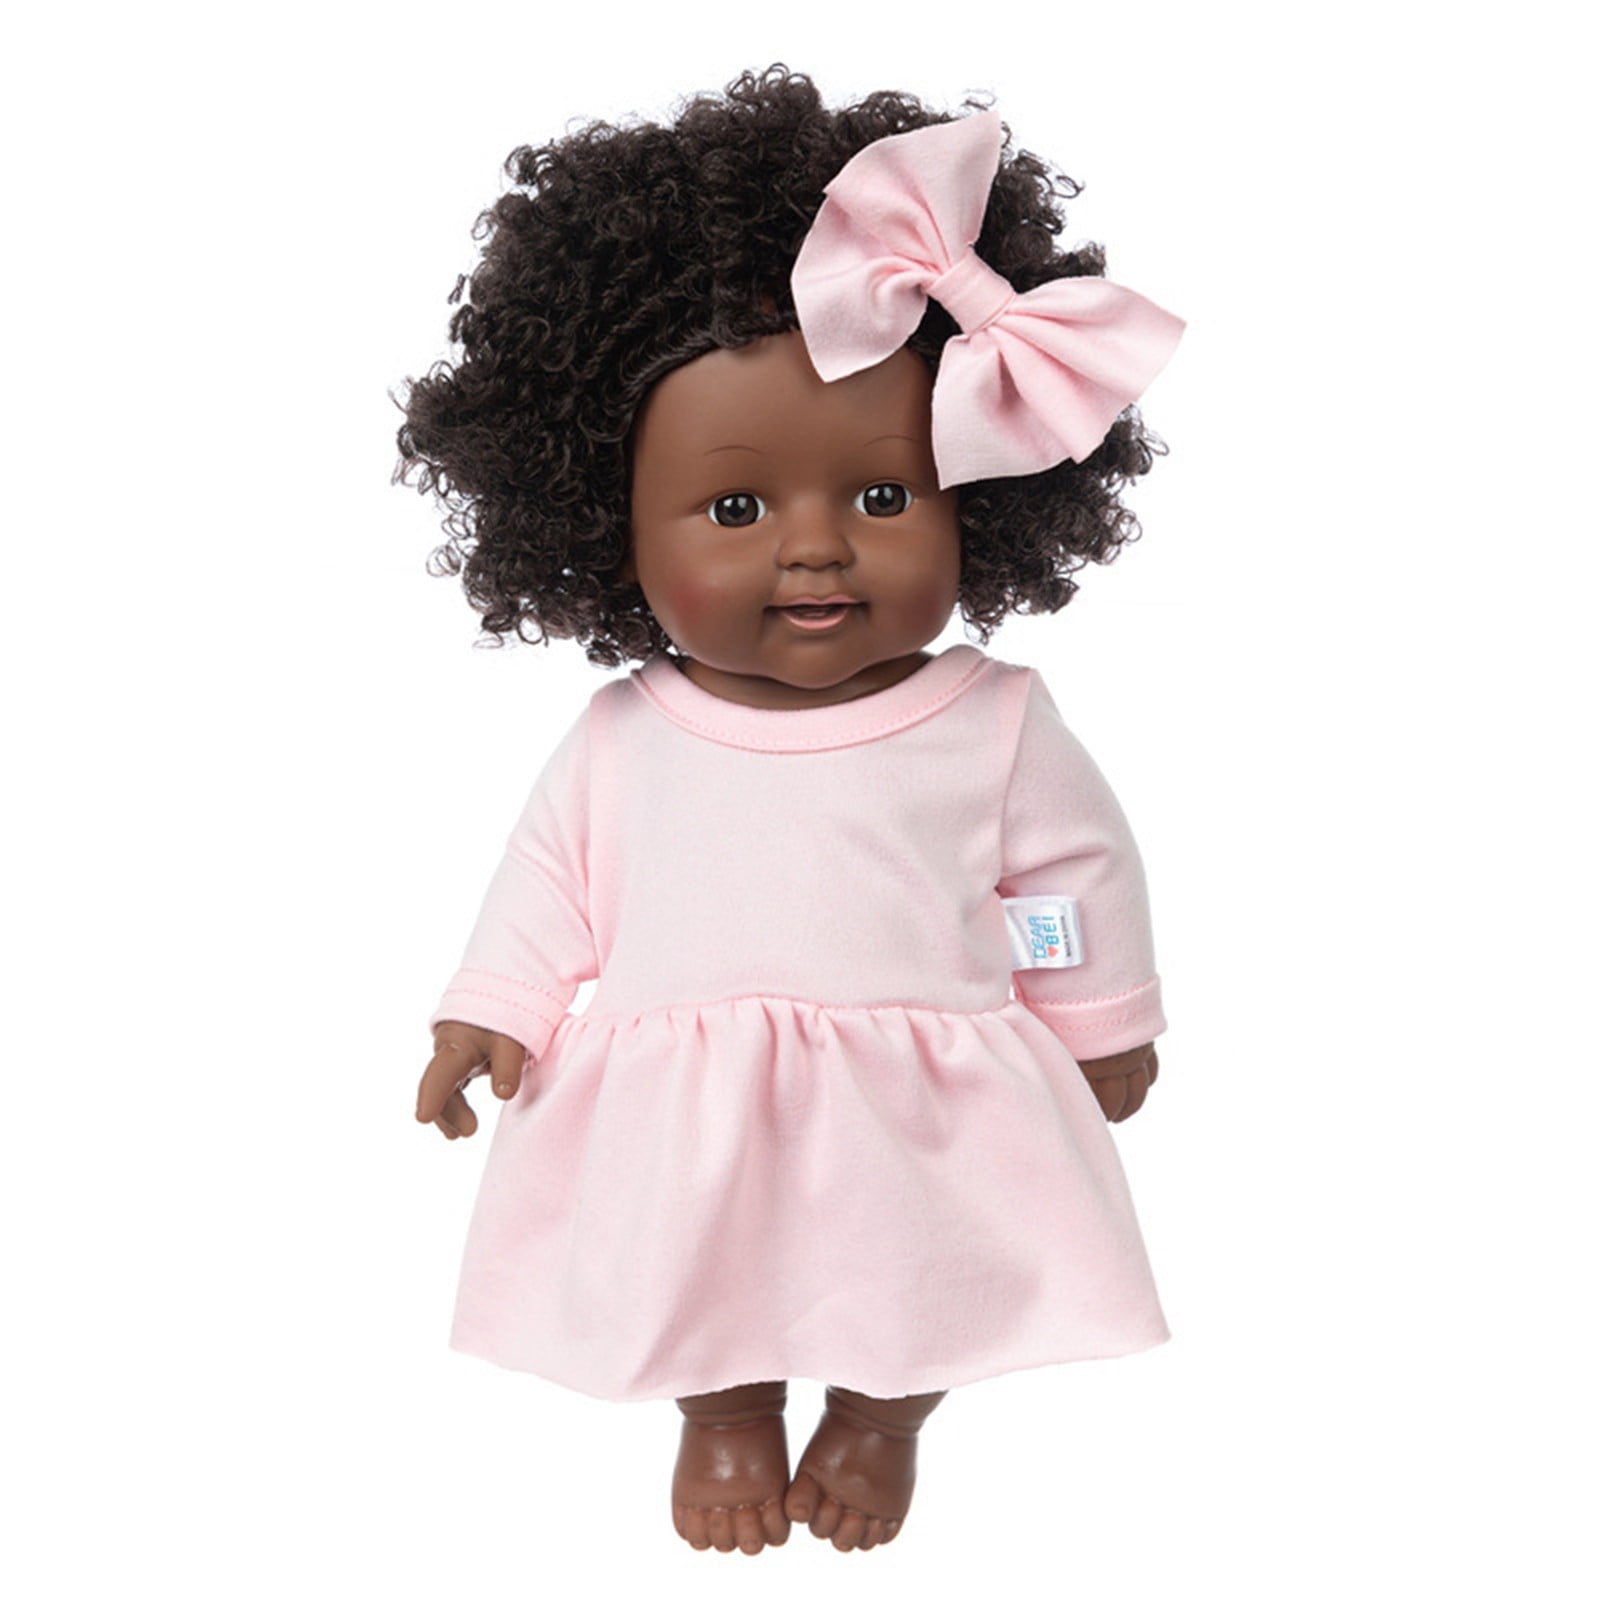 12 Inch Black Baby Dolls with Clothes A,frican Realistic Baby